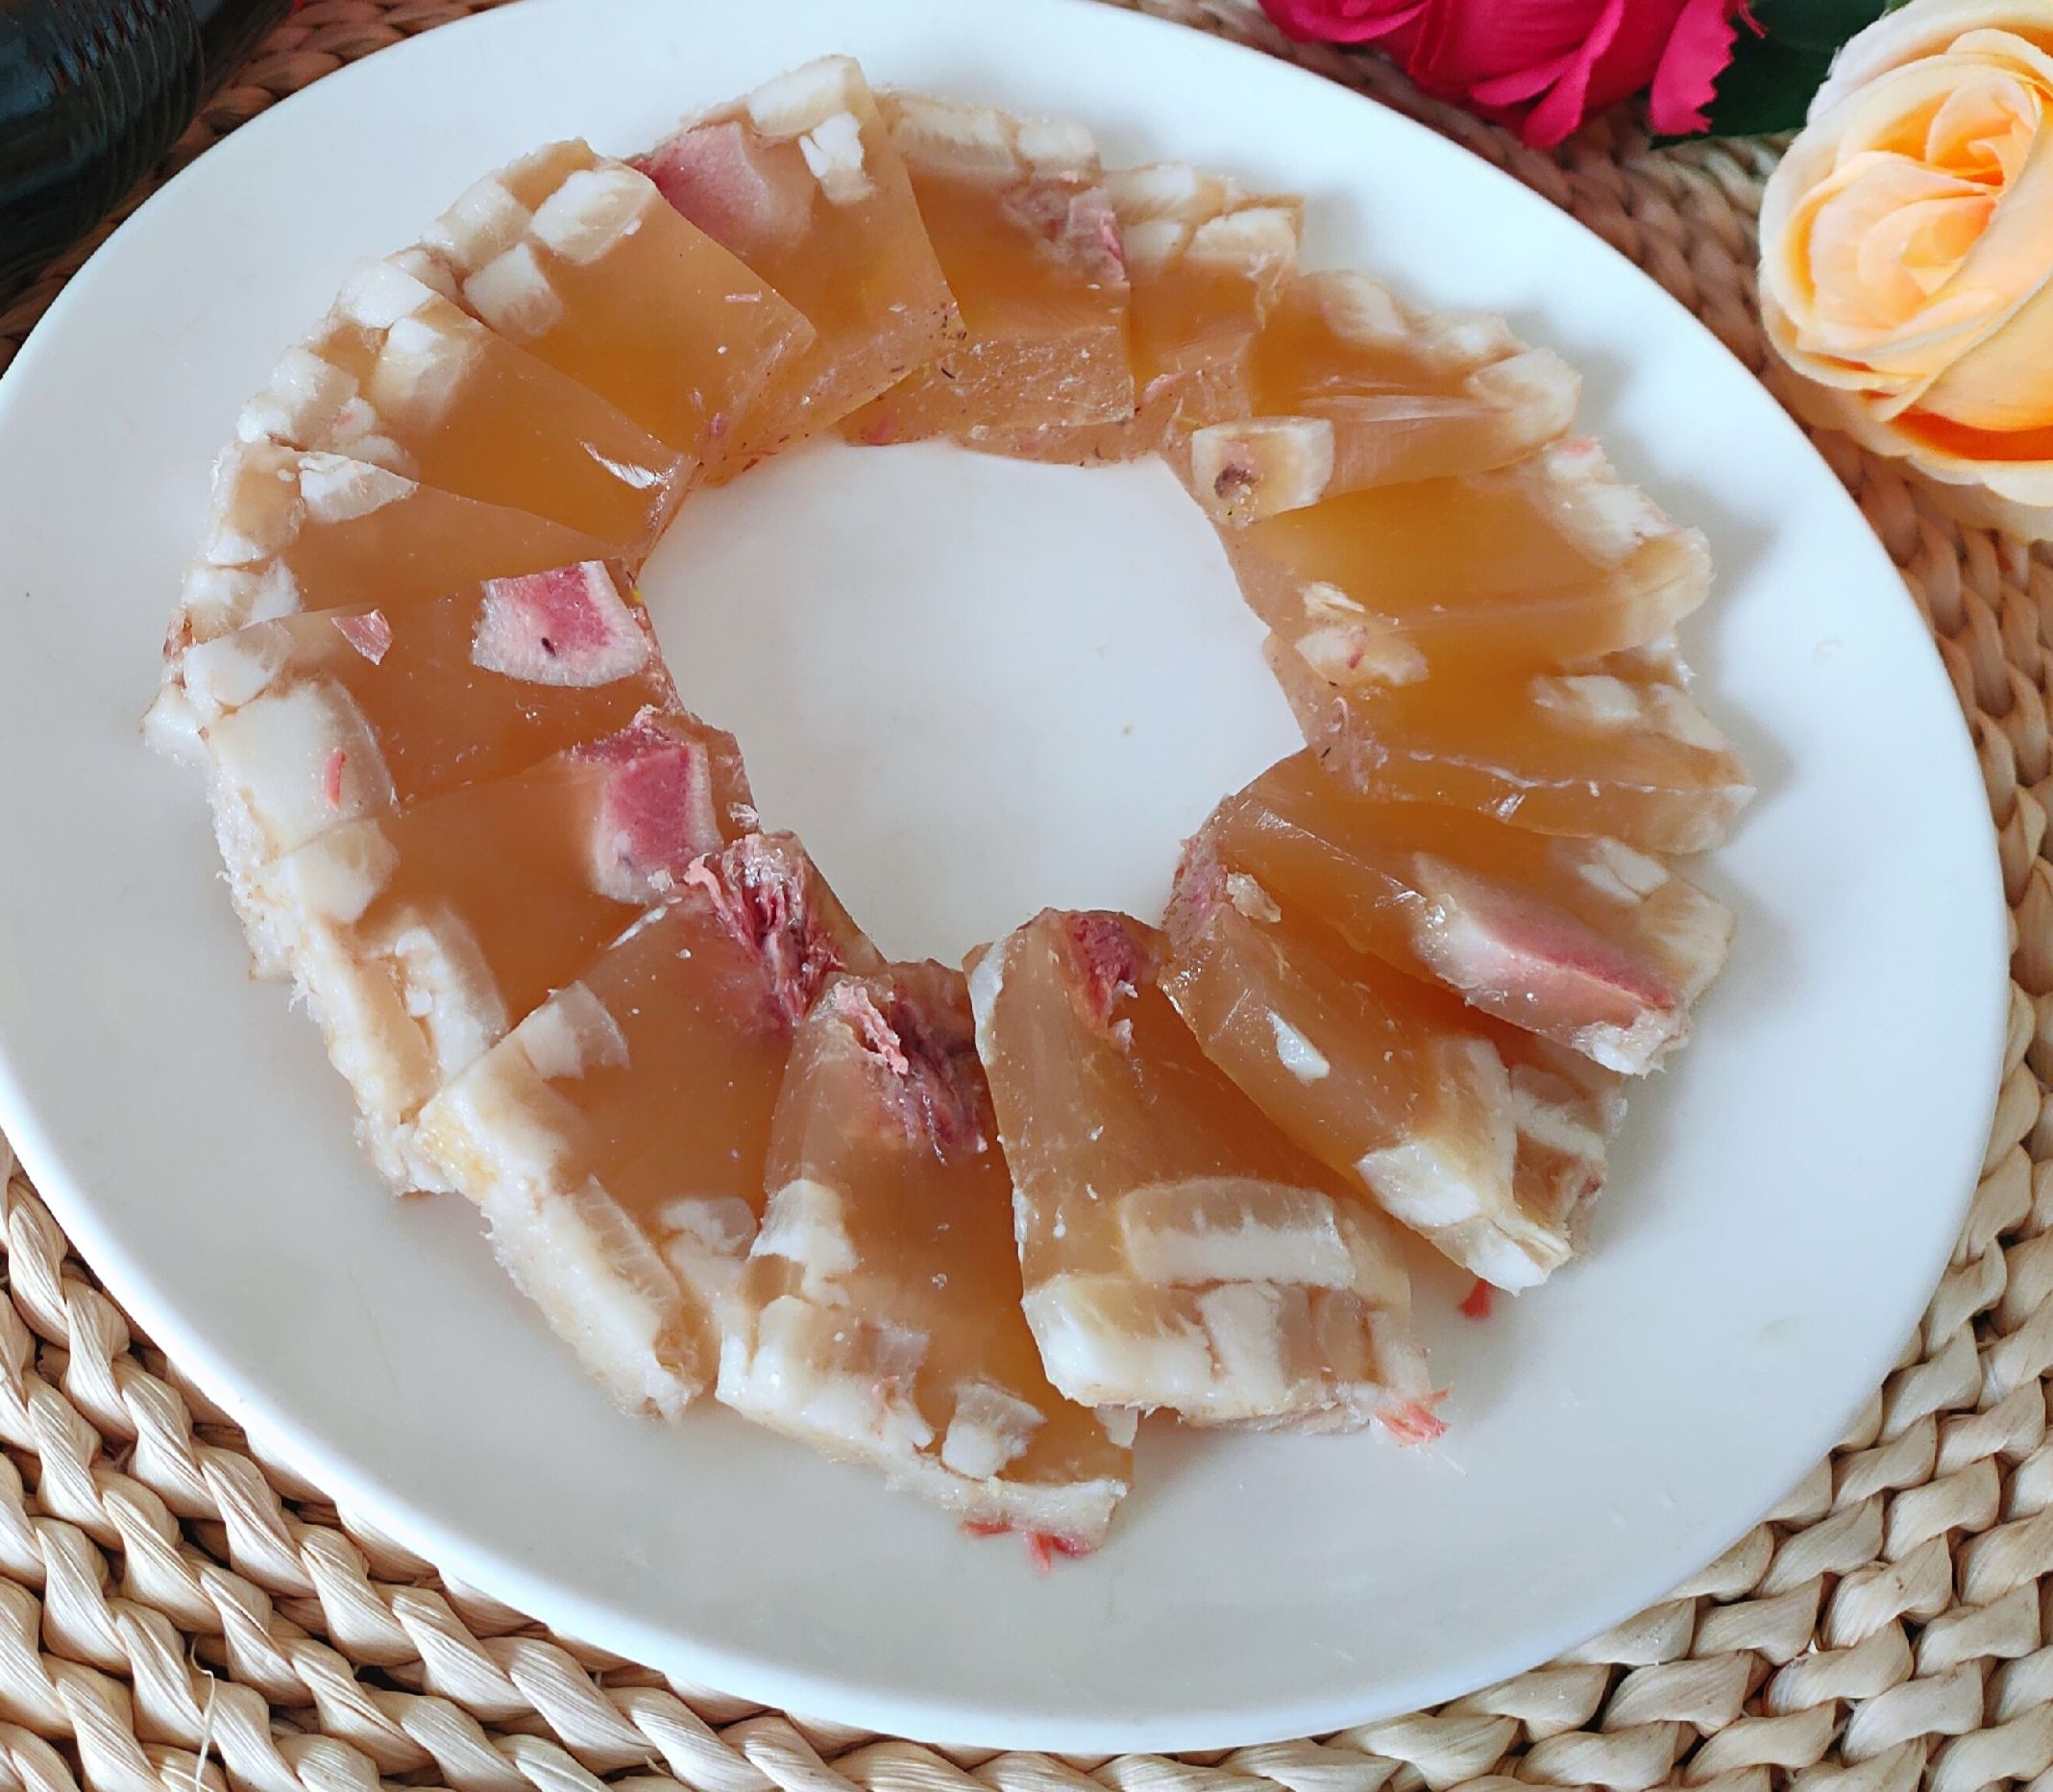 Beauty and Delicious Pig Skin Jelly recipe